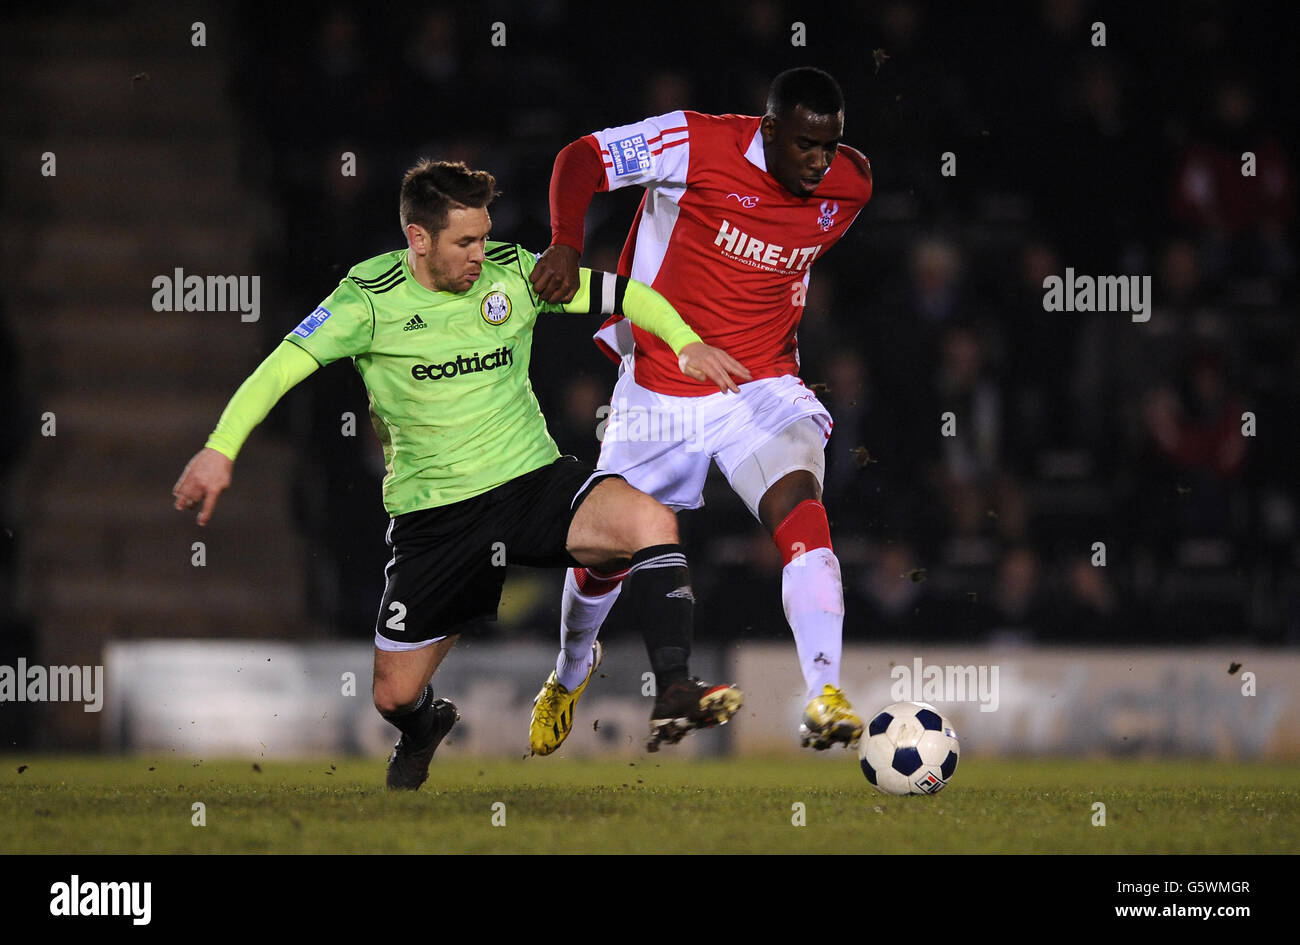 Soccer - Blue Square Premier League - Forest Green Rovers v Kidderminster Harriers - The New Lawn Stock Photo